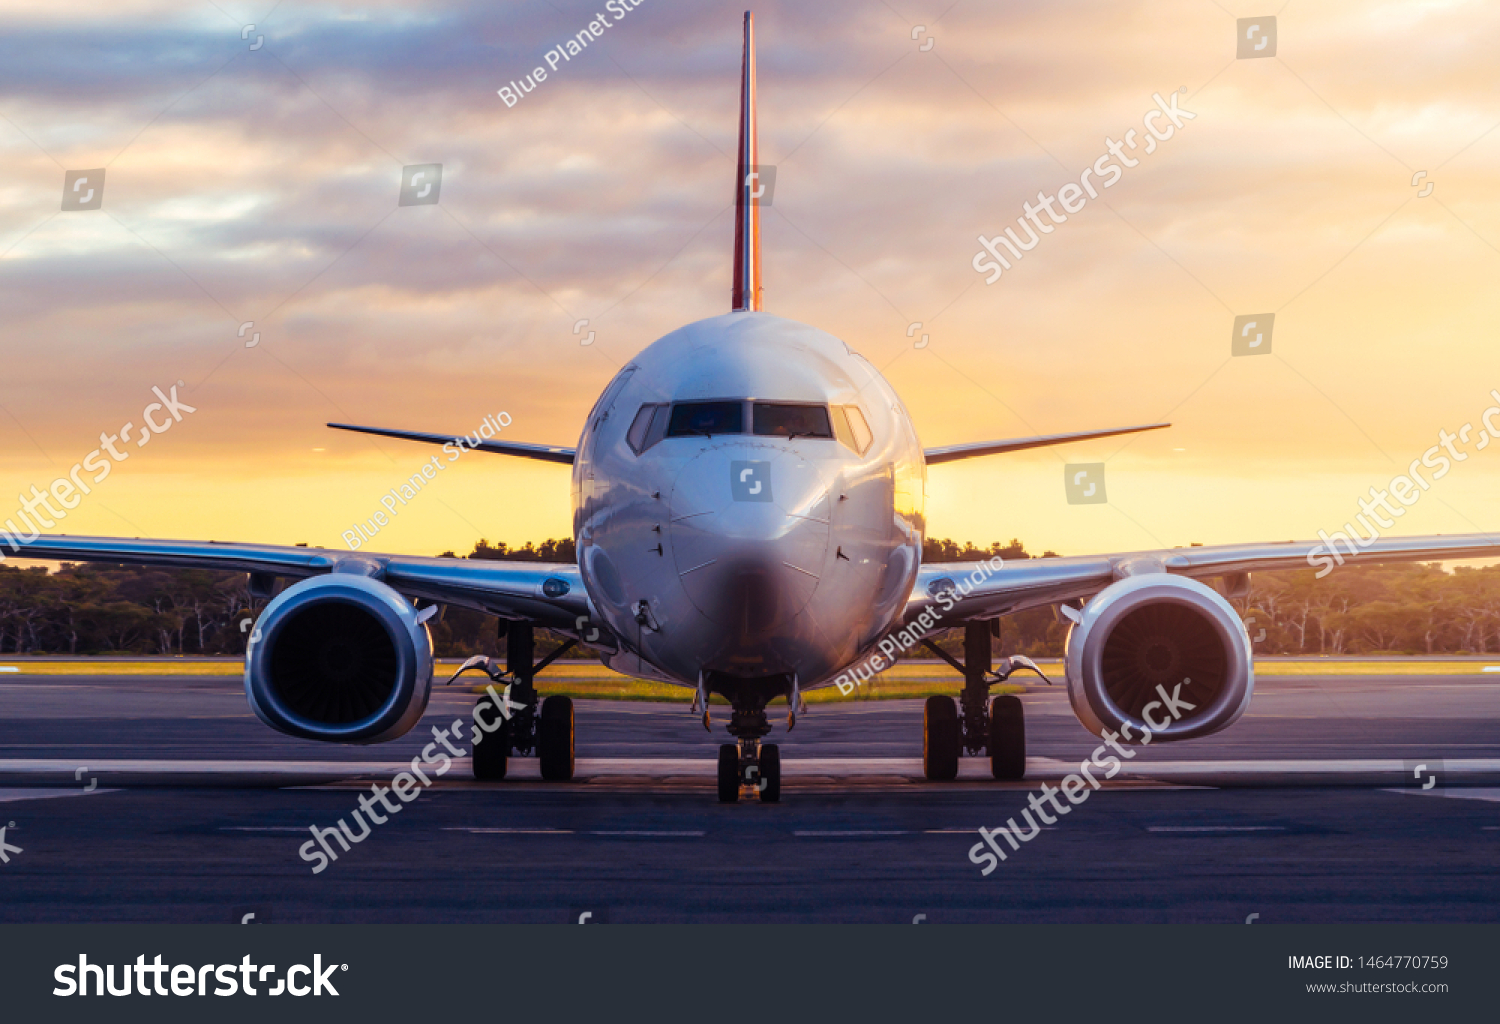 Sunset view of airplane on airport runway under dramatic sky in Hobart,Tasmania, Australia. Aviation technology and world travel concept. #1464770759